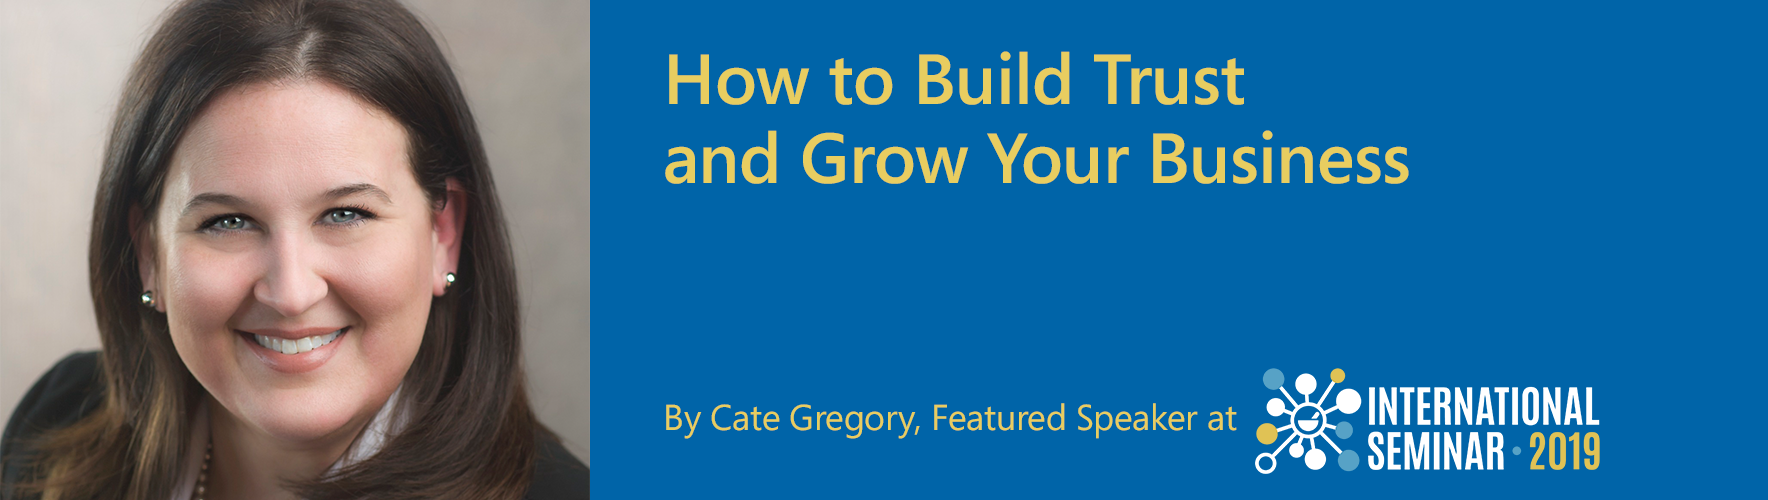 how_to_build_trust_and_grow_your_business.png